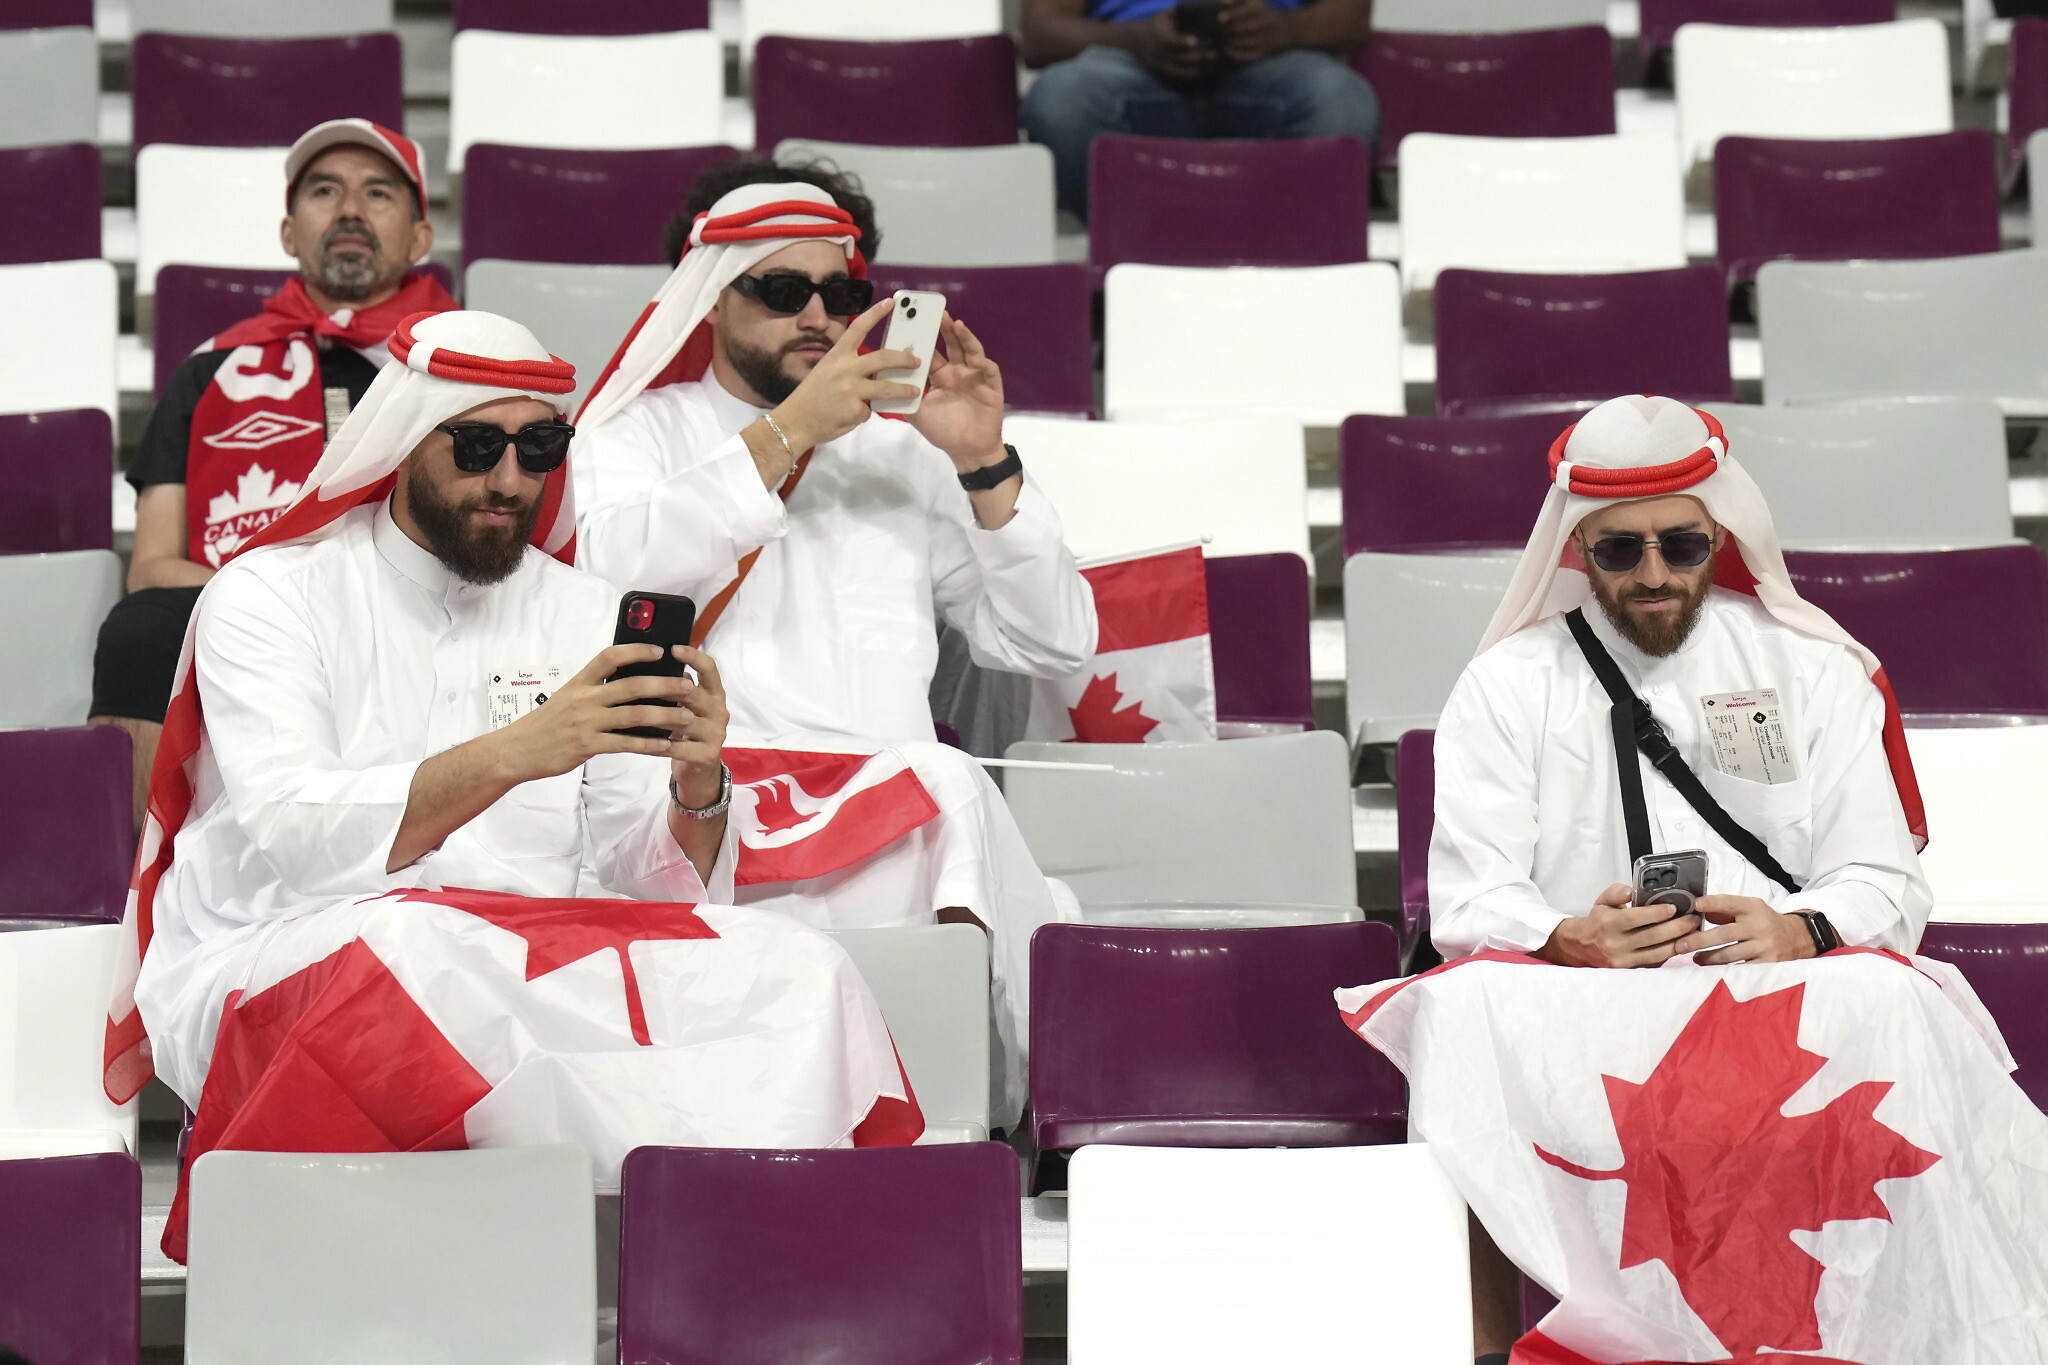 Crusader outfits and hijabs: Mixed response to fans' wild World